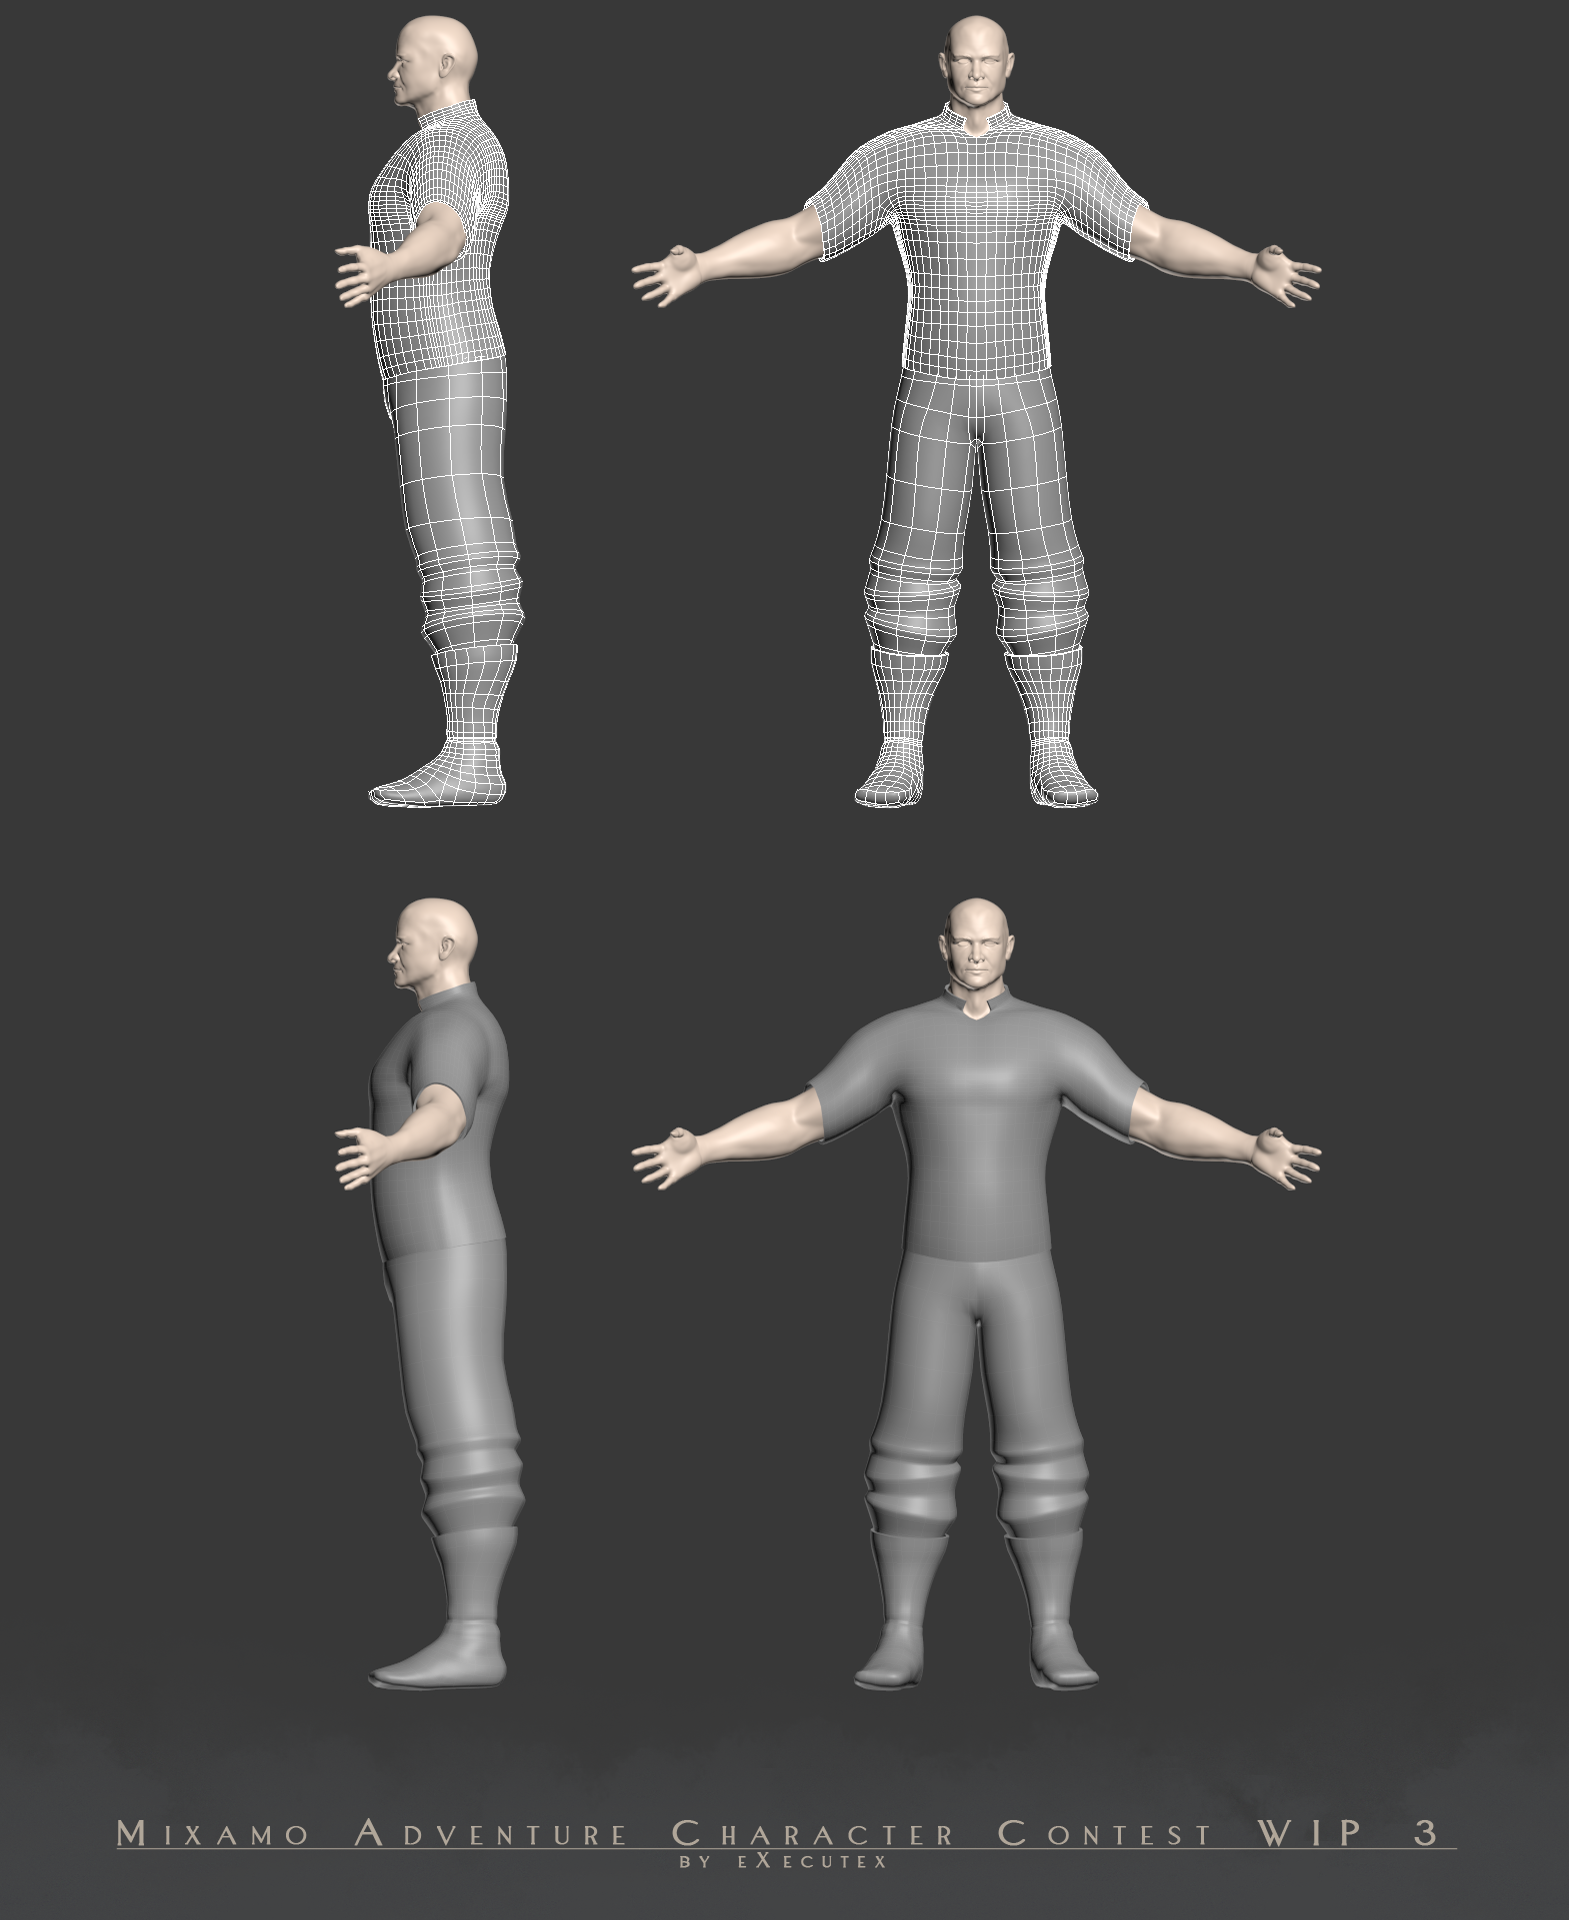 mixamo_adventure_character_by_executex_wip_3_by_executex-d69myl1.png